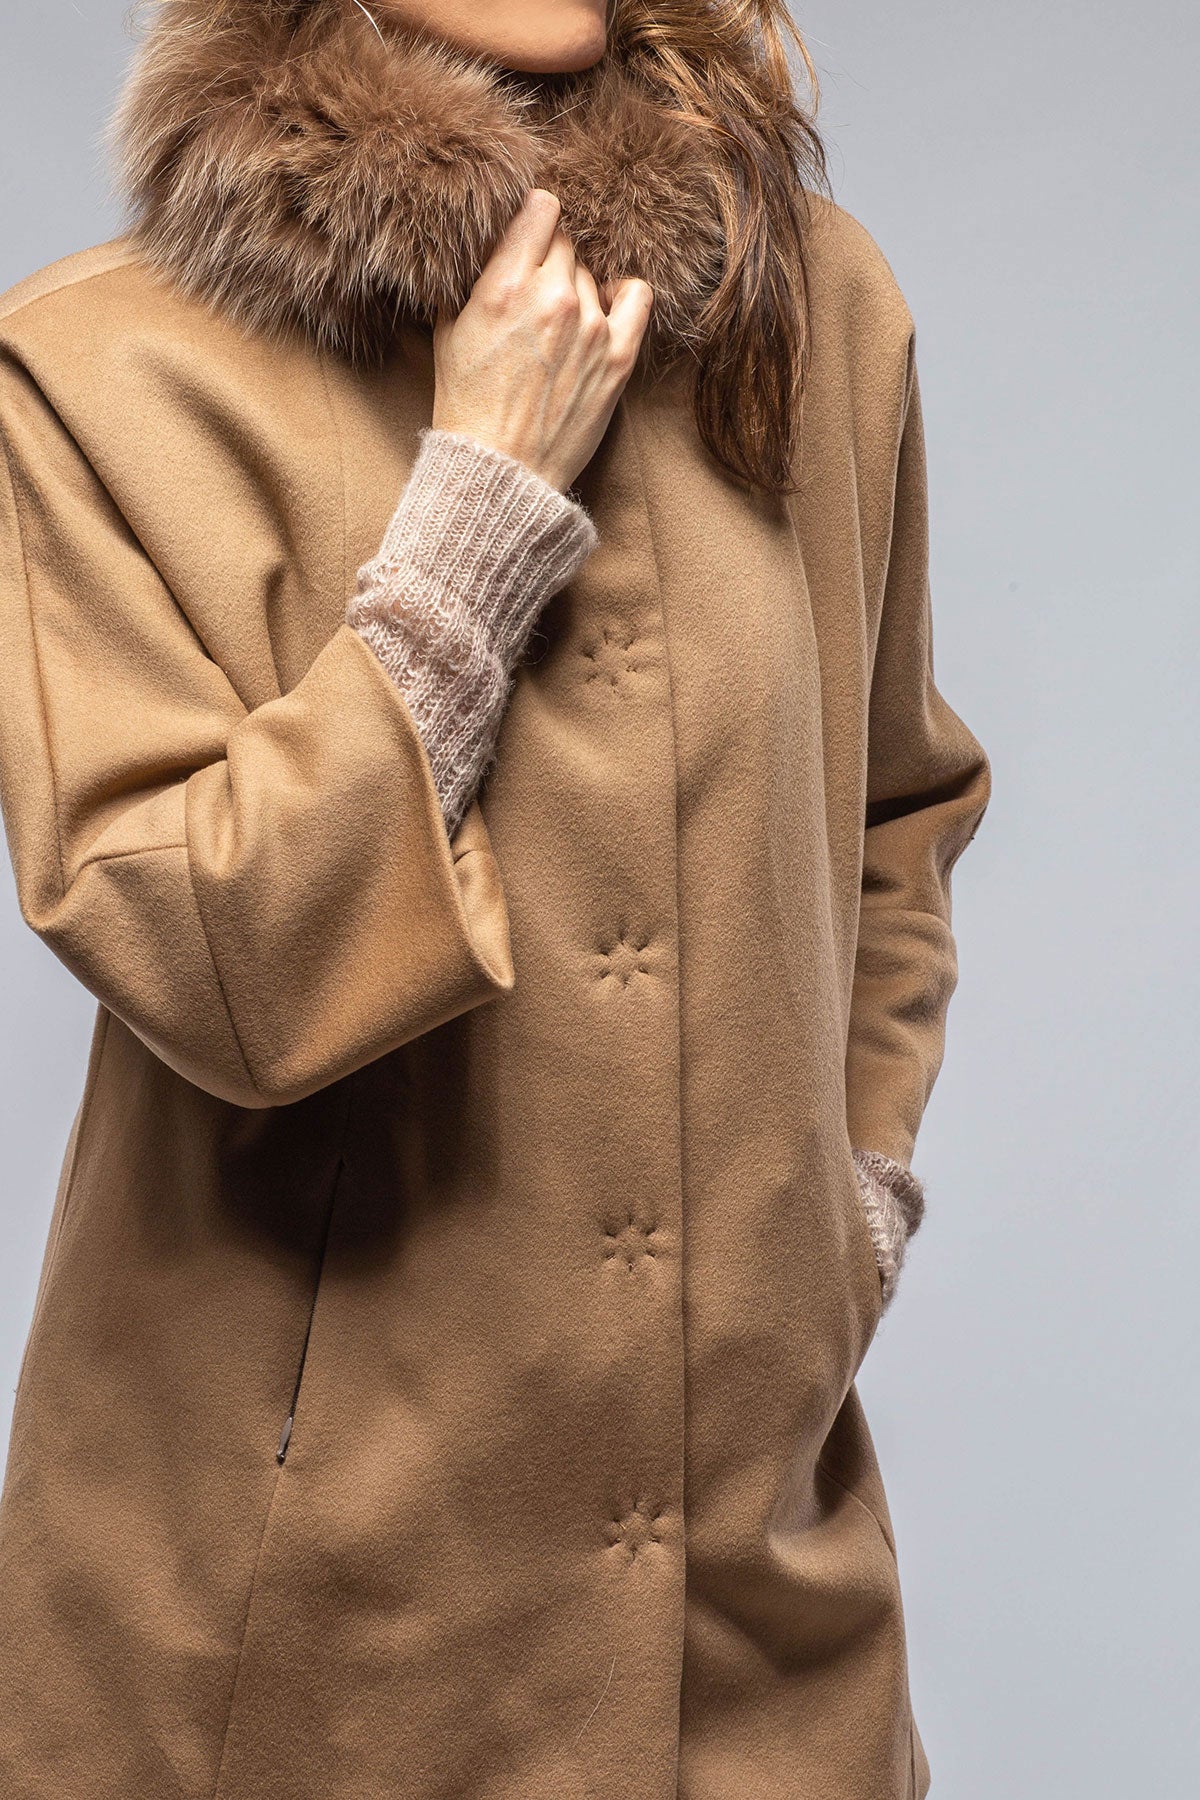 Diane Wool/Cashmere Overcoat | Warehouse - Ladies - Outerwear - Cloth | Gimo's